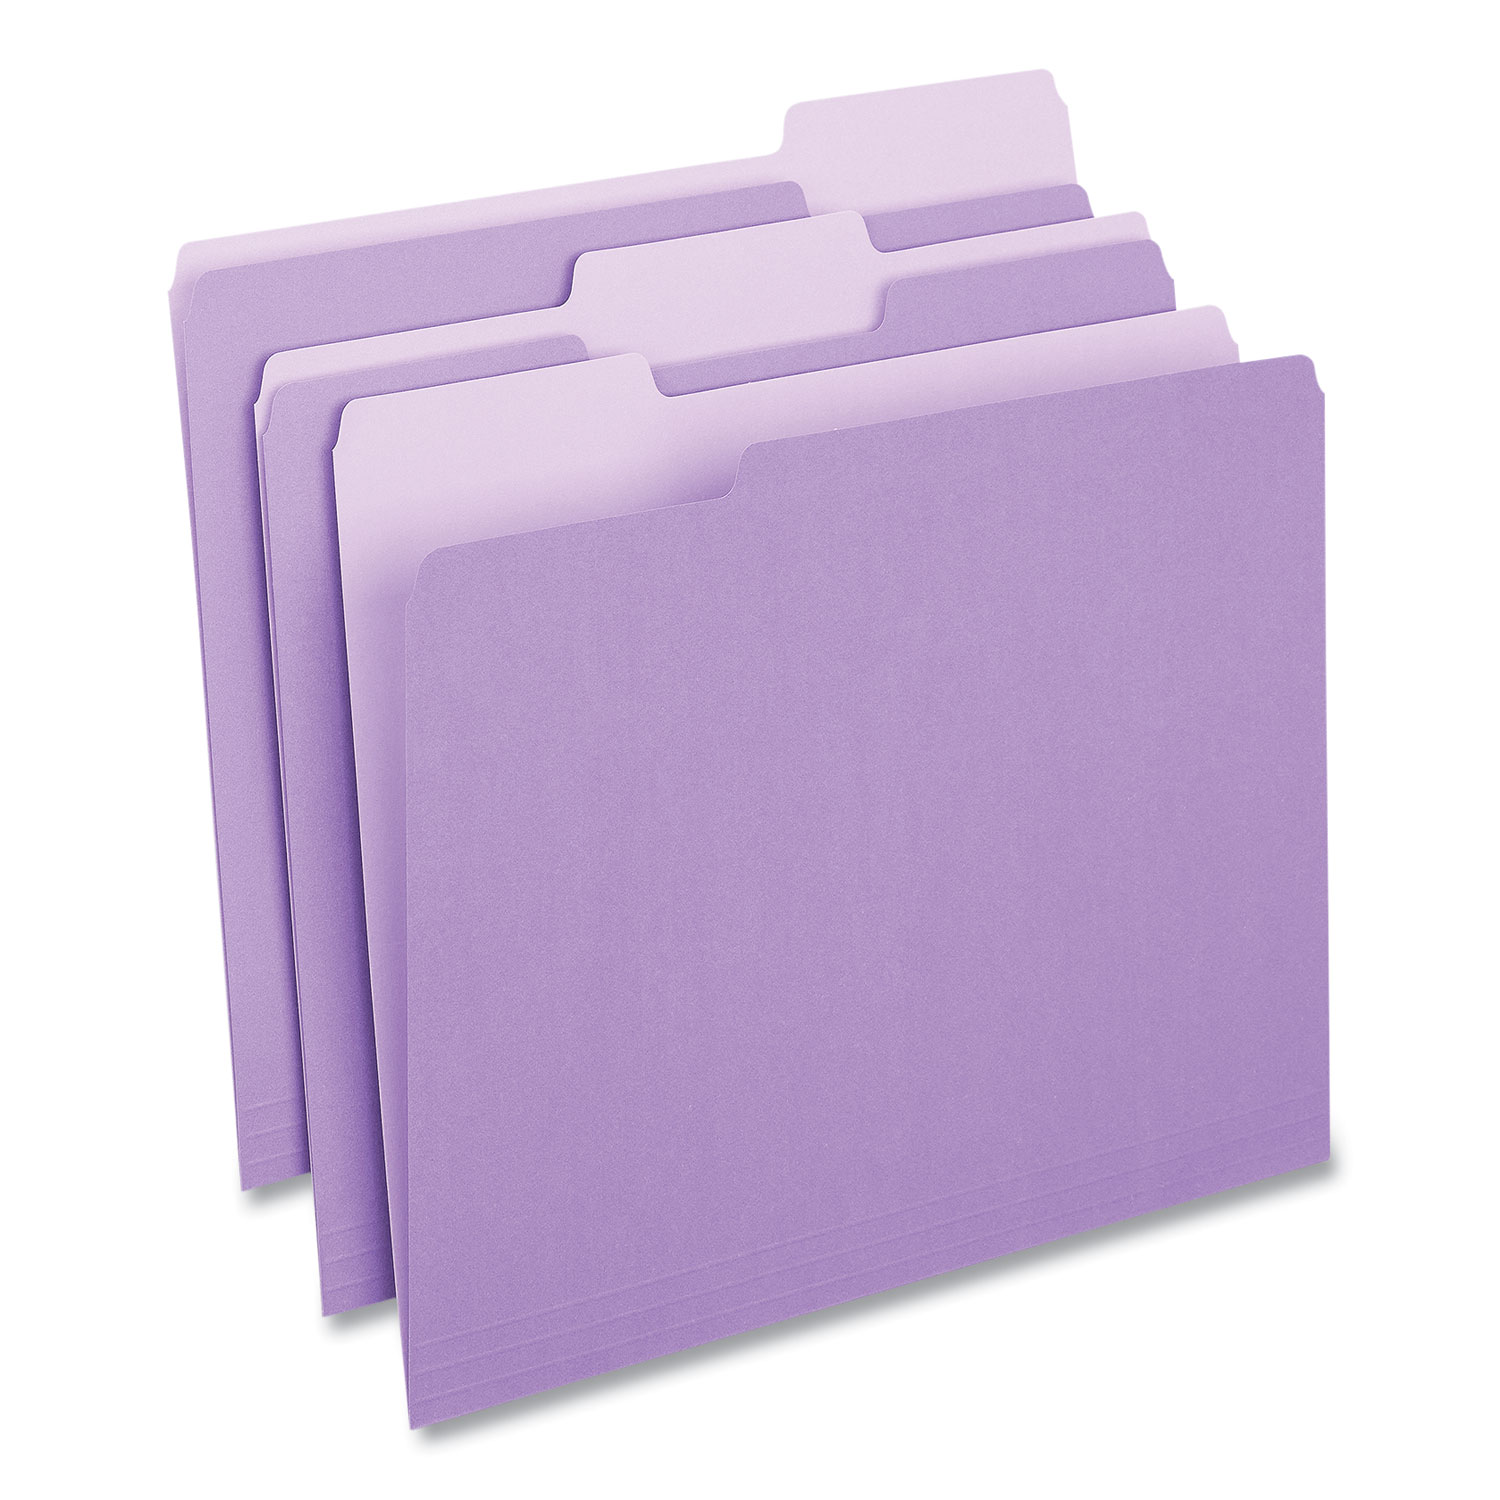 Deluxe Colored Tab File Folders, 1/3-Cut Tabs: Letter Size, Violet/Light Violet, 100/Box - Reliable Paper